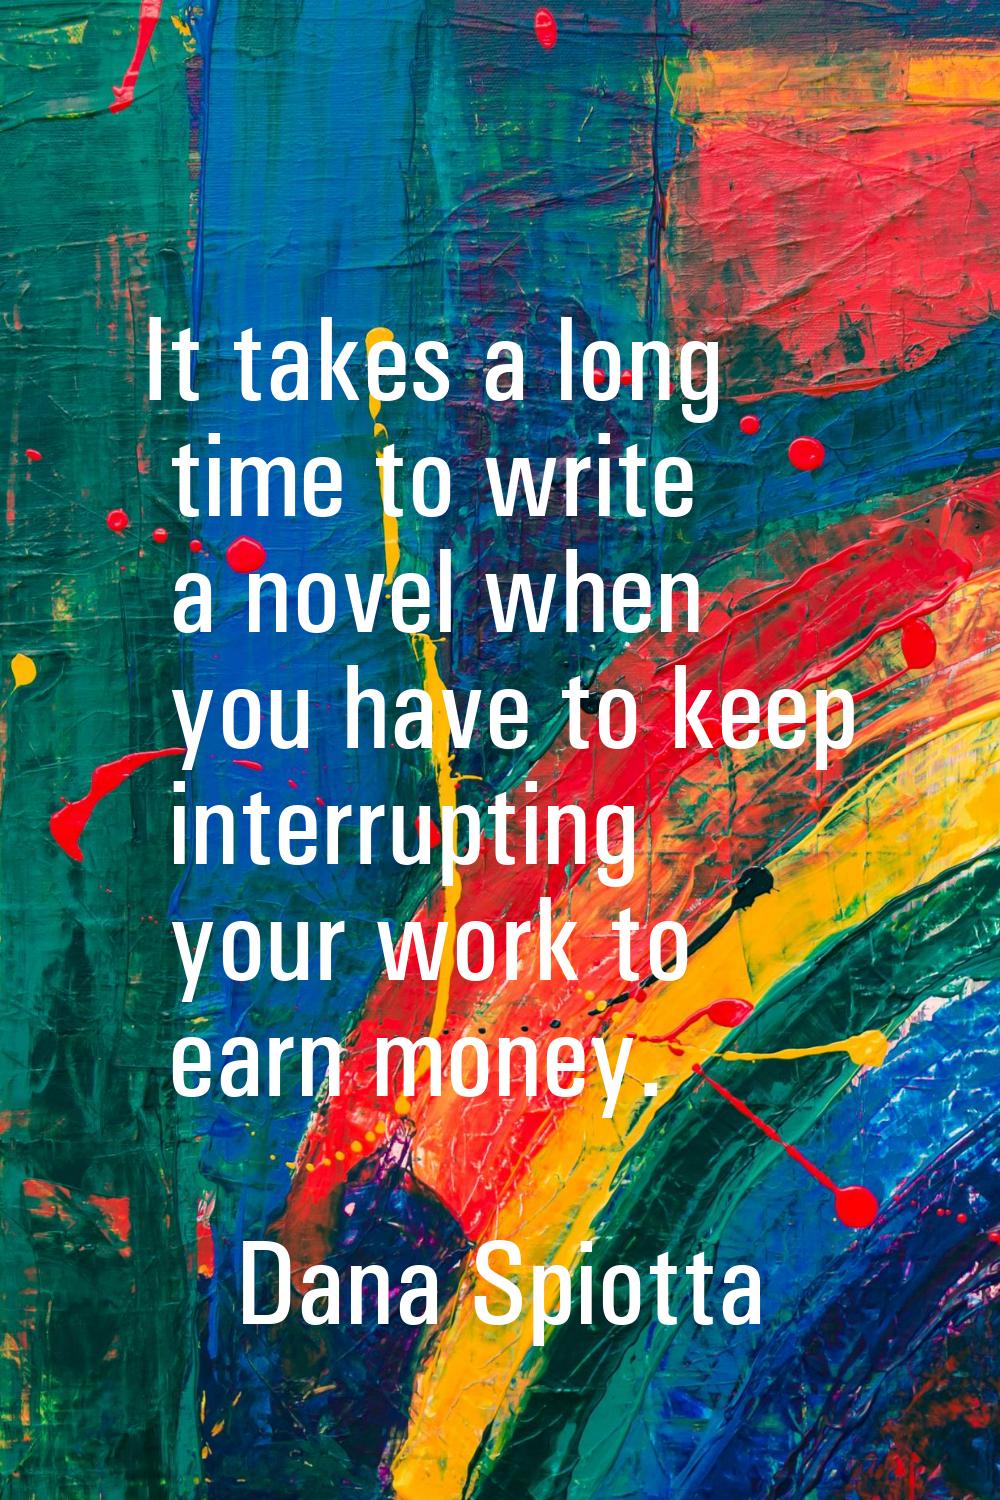 It takes a long time to write a novel when you have to keep interrupting your work to earn money.